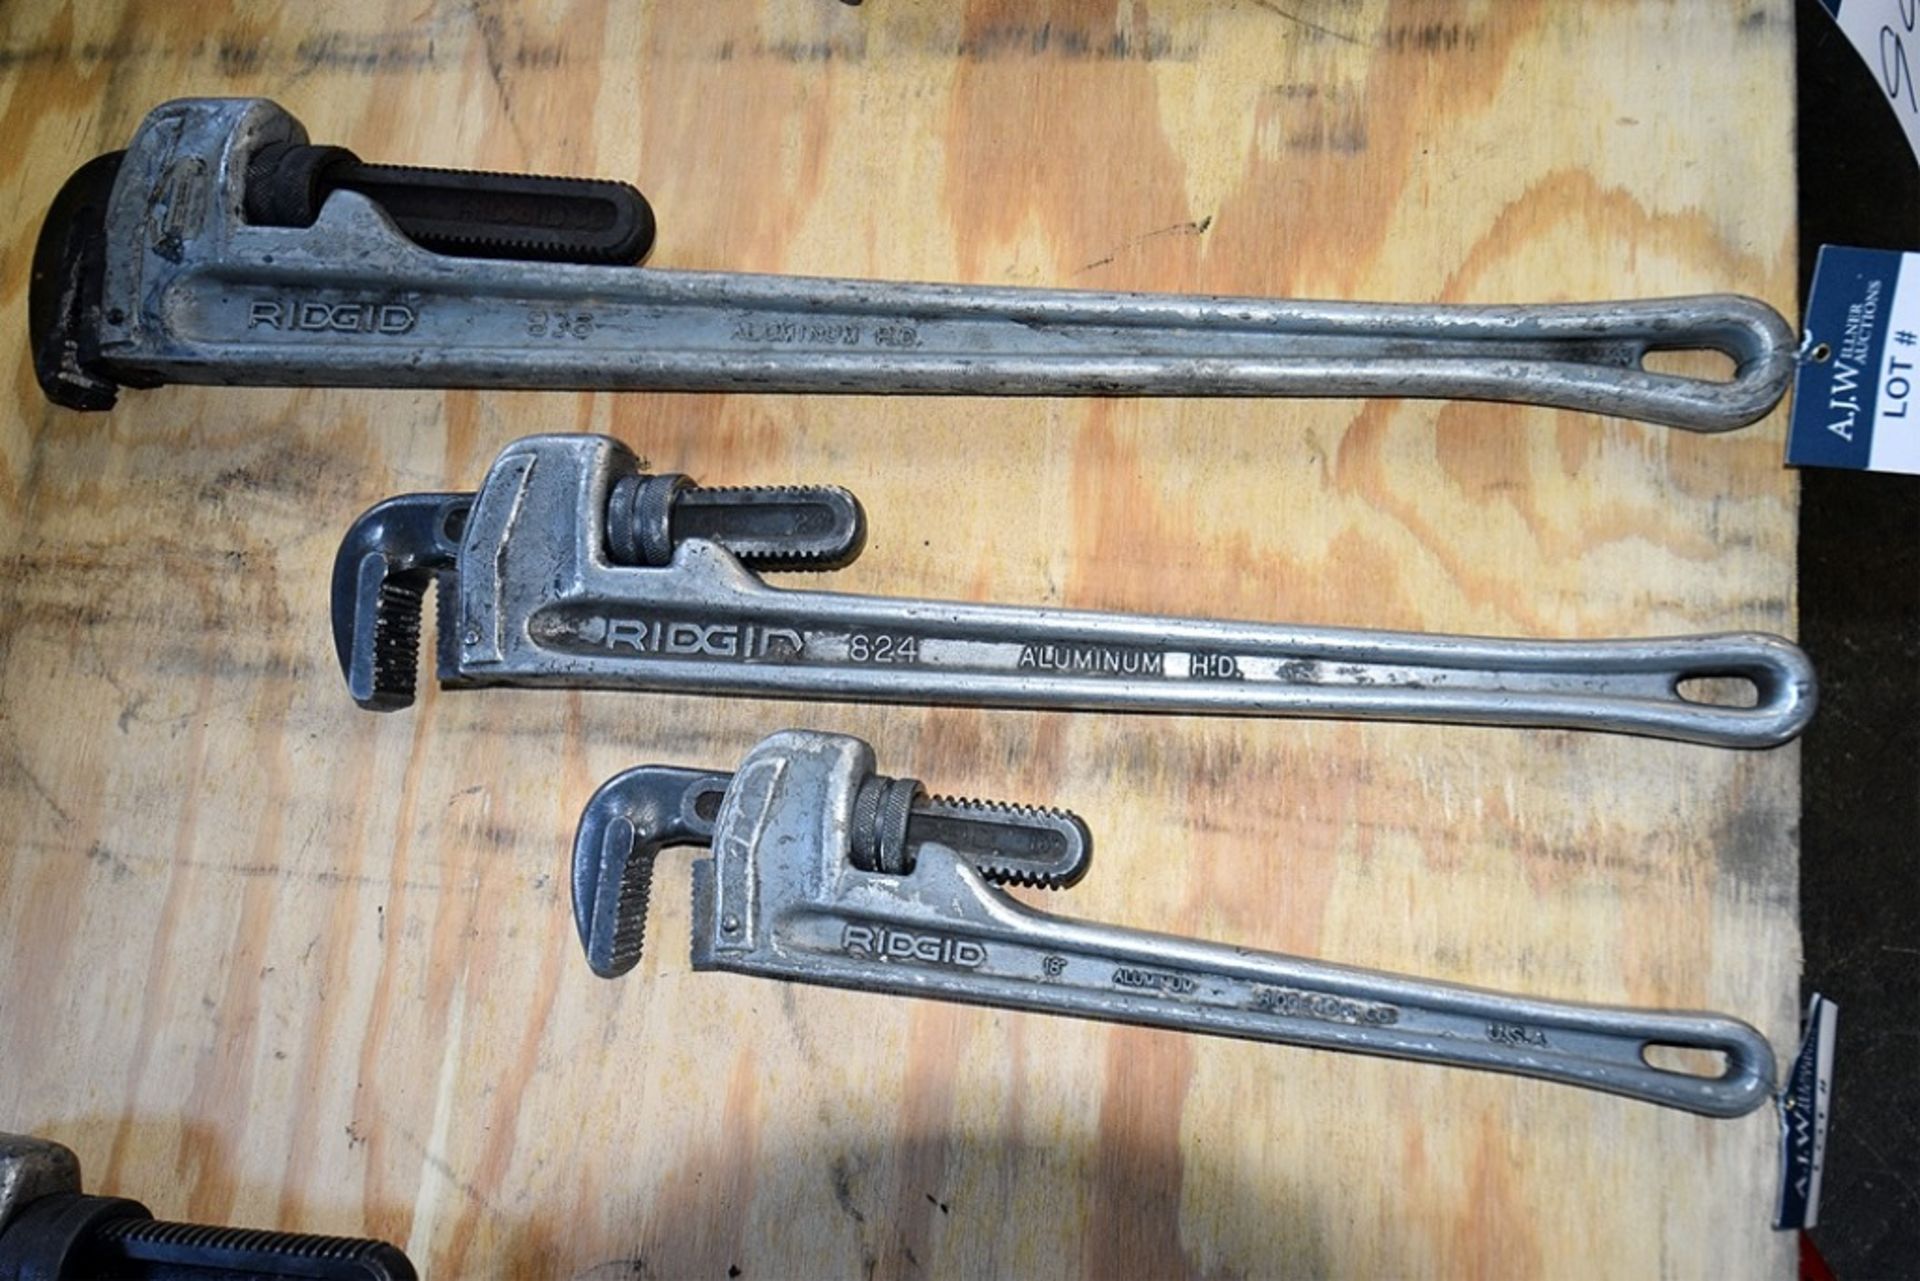 Ridgid Aluminum Pipe Wrench Set Consisting of: (1) 36", (1) 24", and (1) 18"